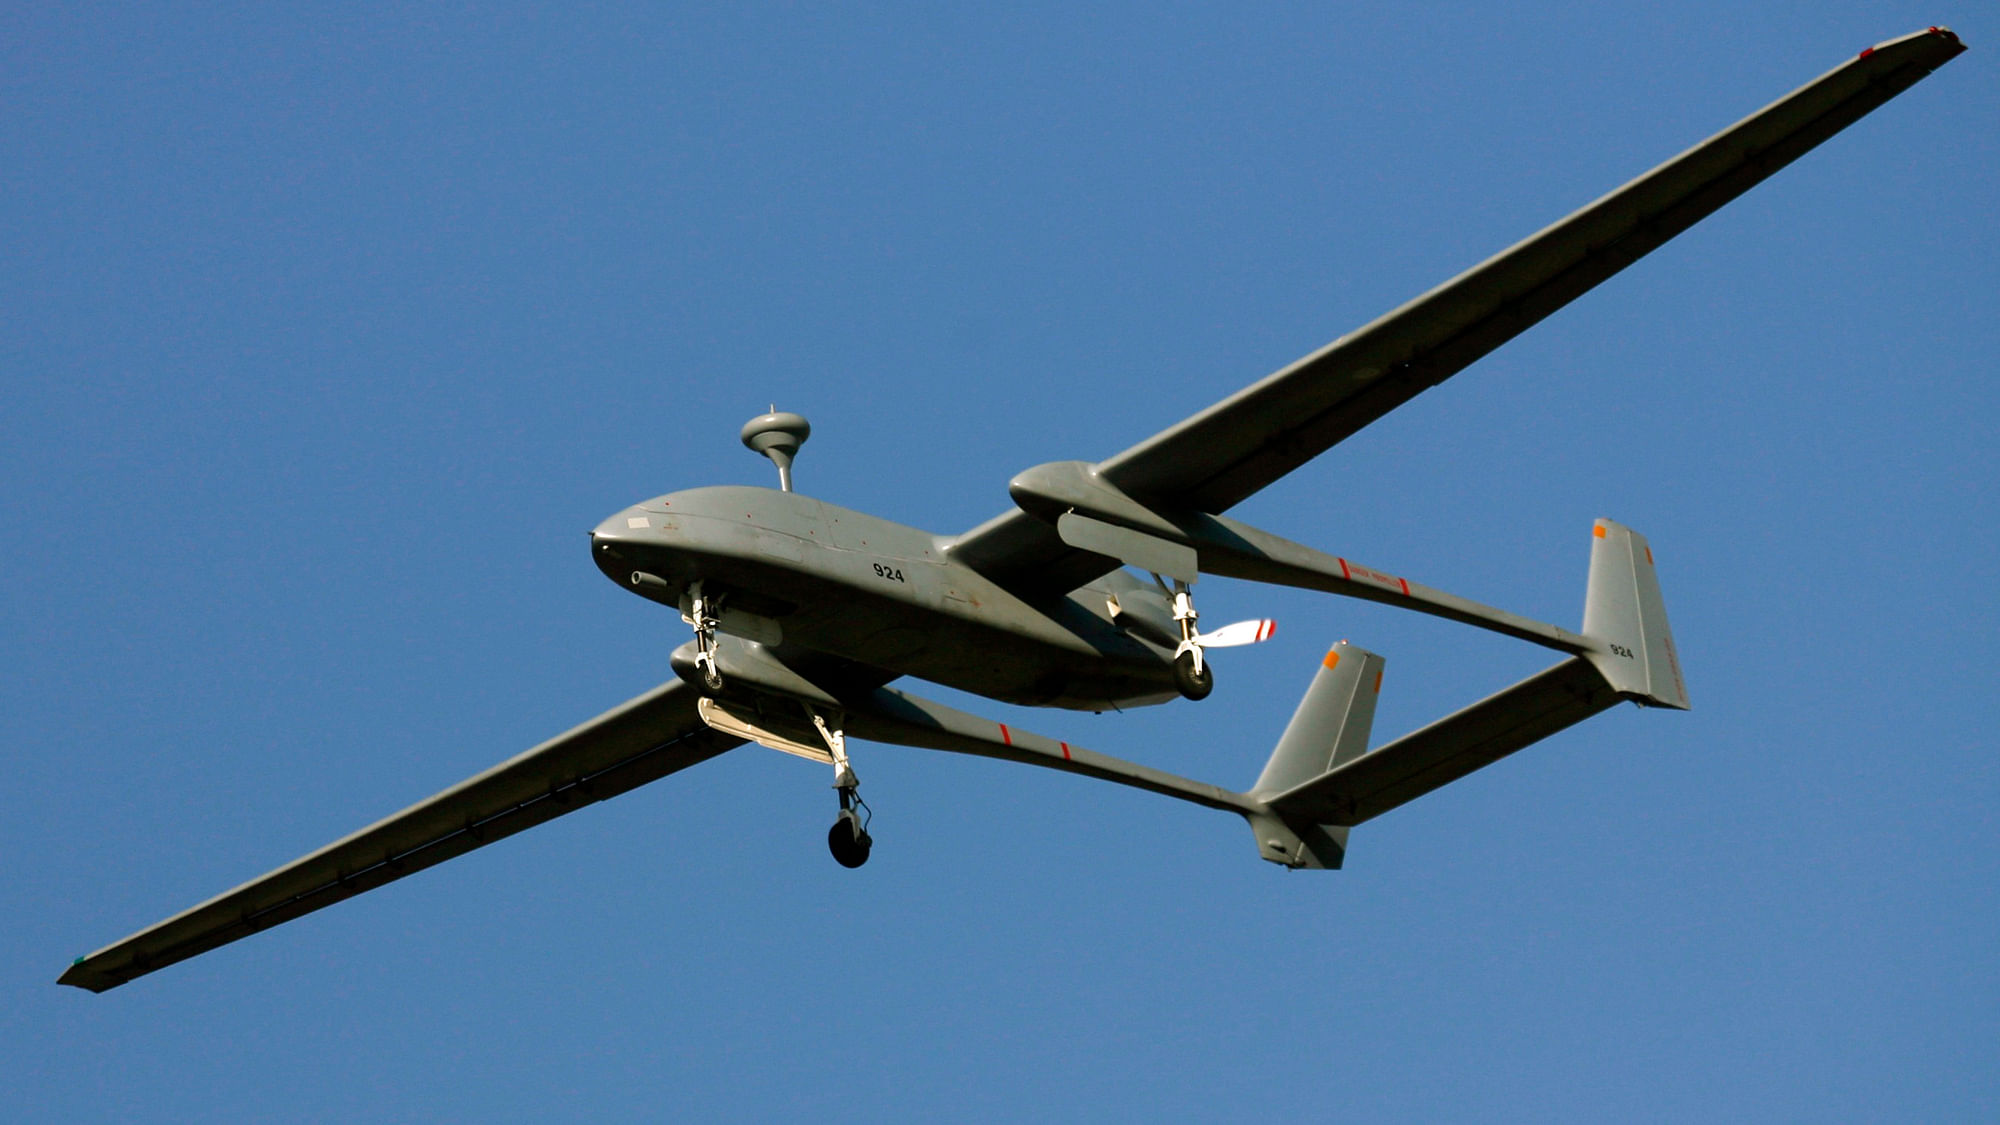 An Israeli-made Heron unmanned aerial vehicle (UAV) flies over Porbandar, during its commissioning into the Indian Navy.